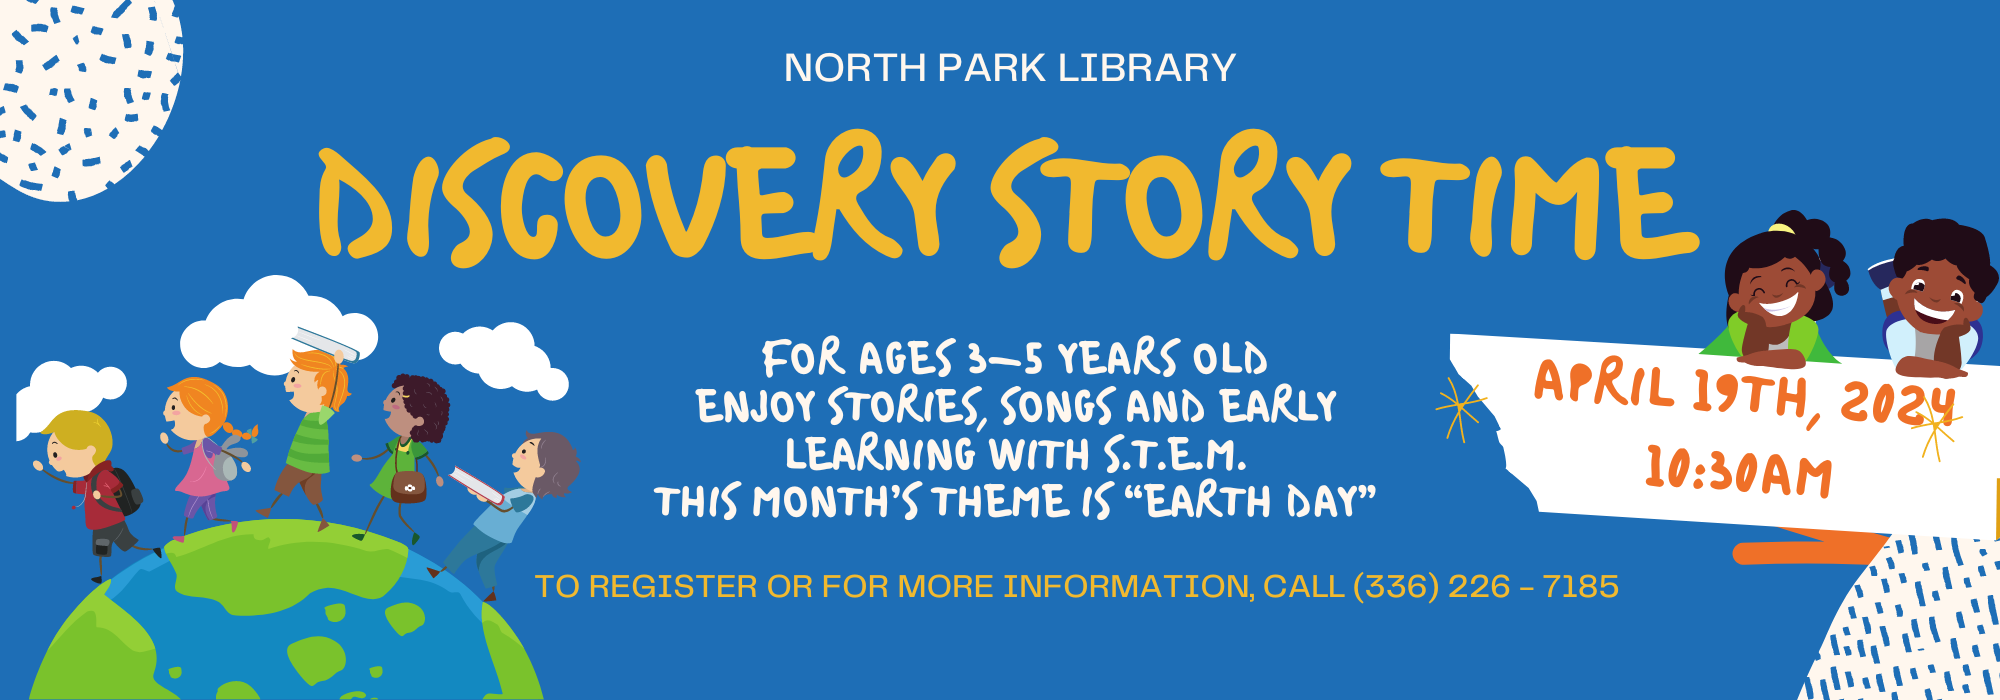 4.19 at 1030 am - Discovery Storytime at North Park